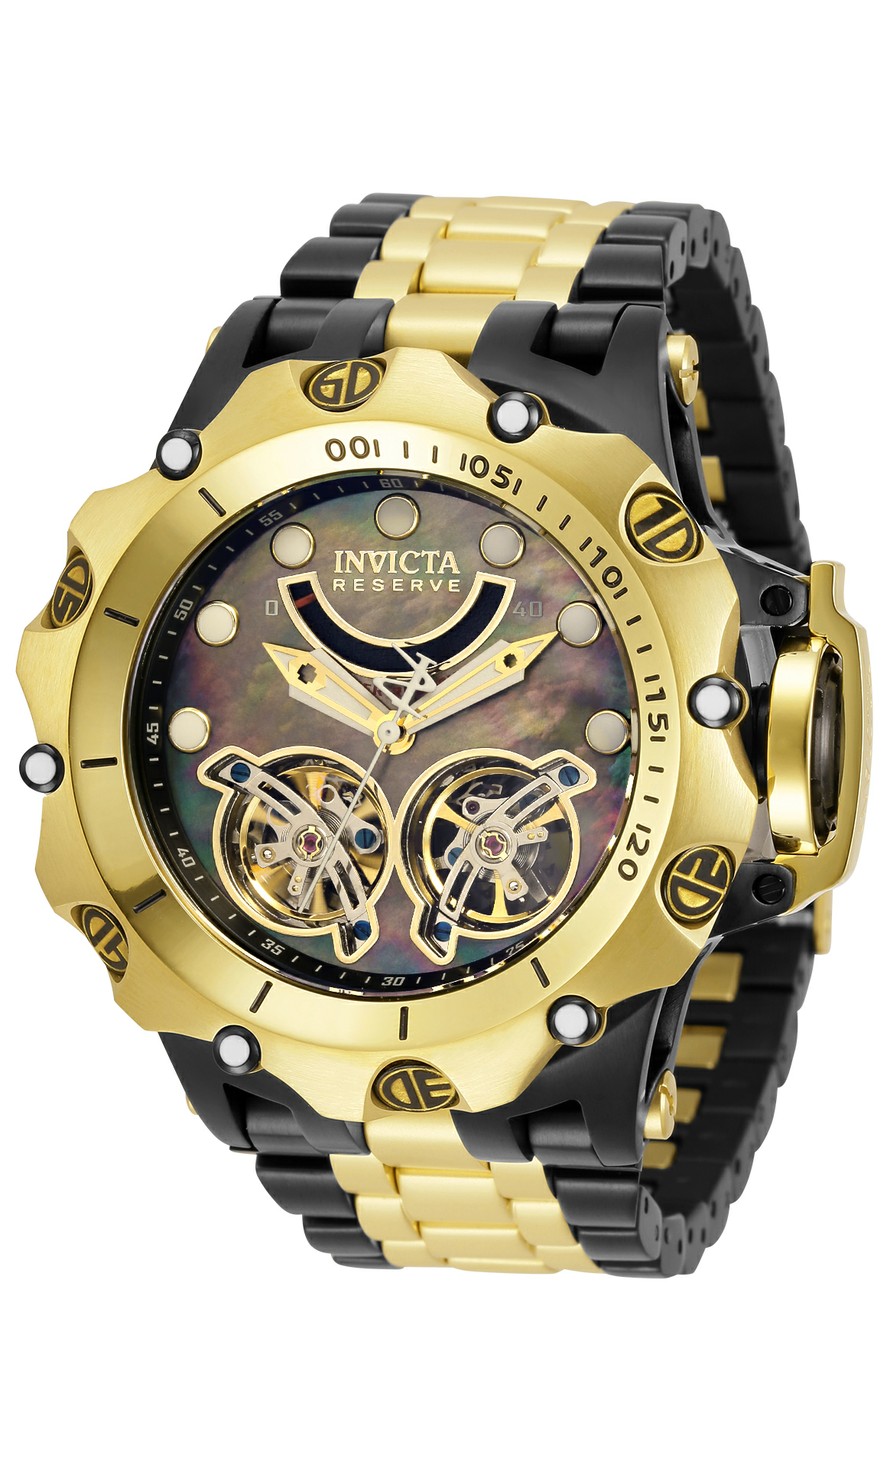 Invicta Reserve Venom Automatic Mens Watch - 51mm Stainless Steel Case, Stainless Steel Band, Black, Gold (33555)